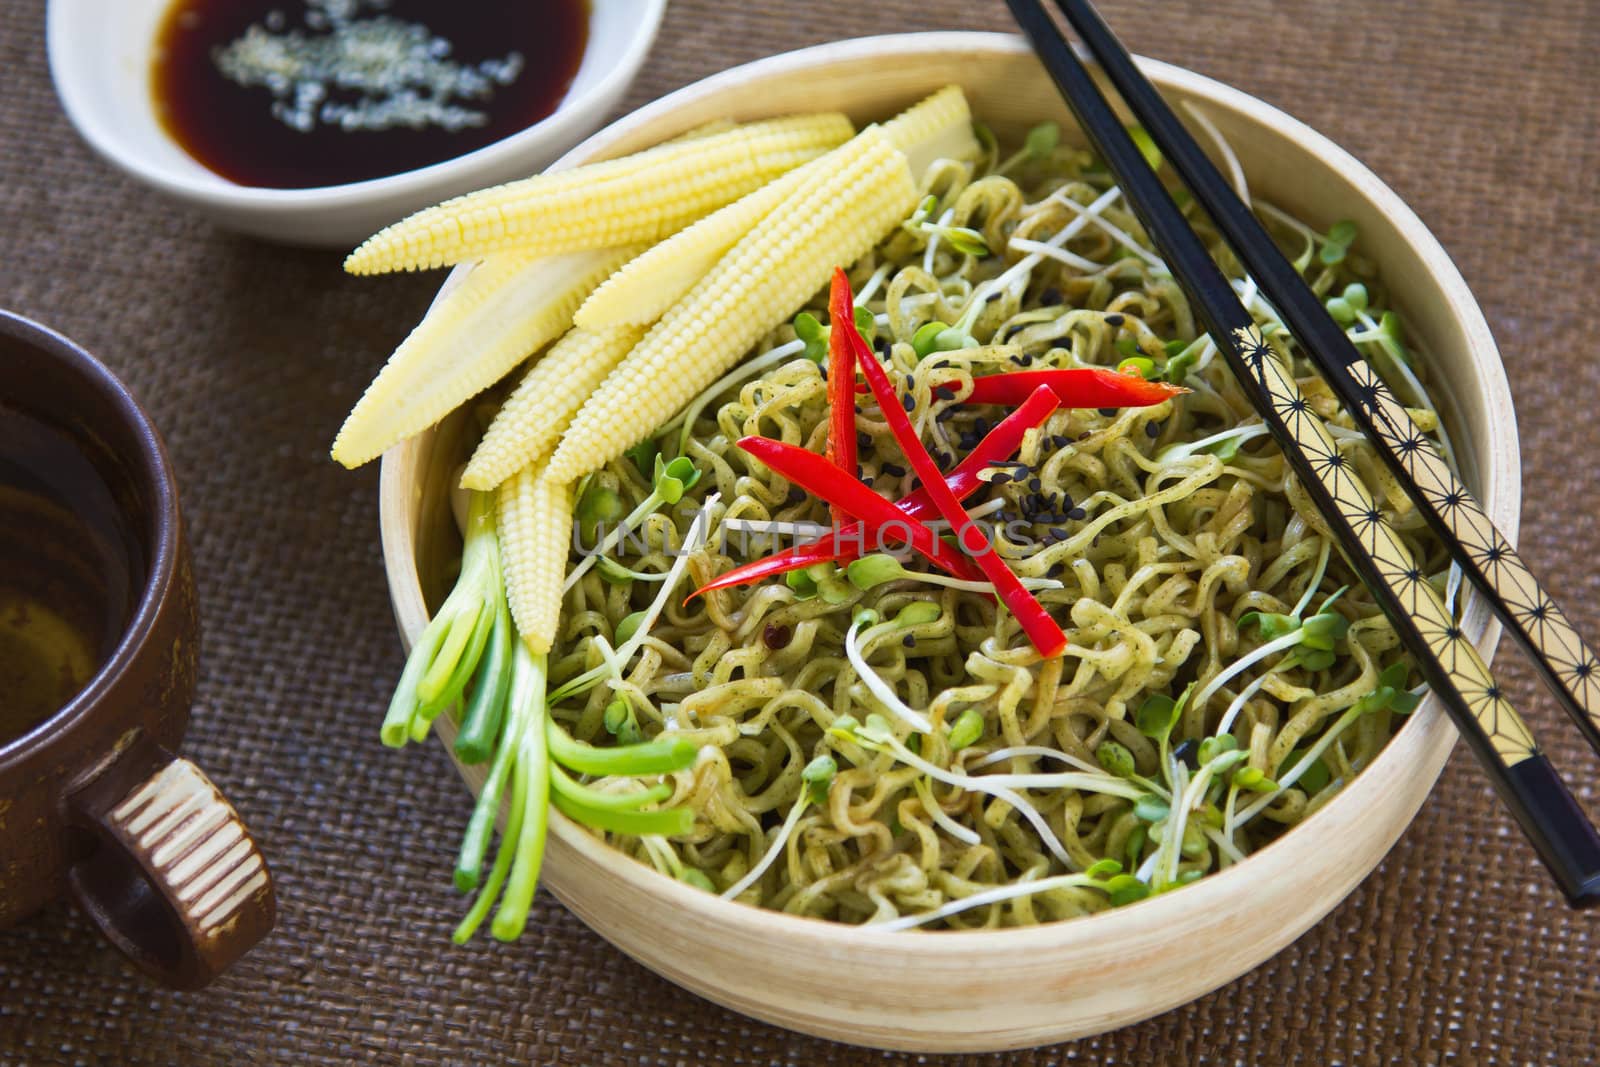 Spinach noodle salad with baby corn,spring onion and soysauce and sesame dressing